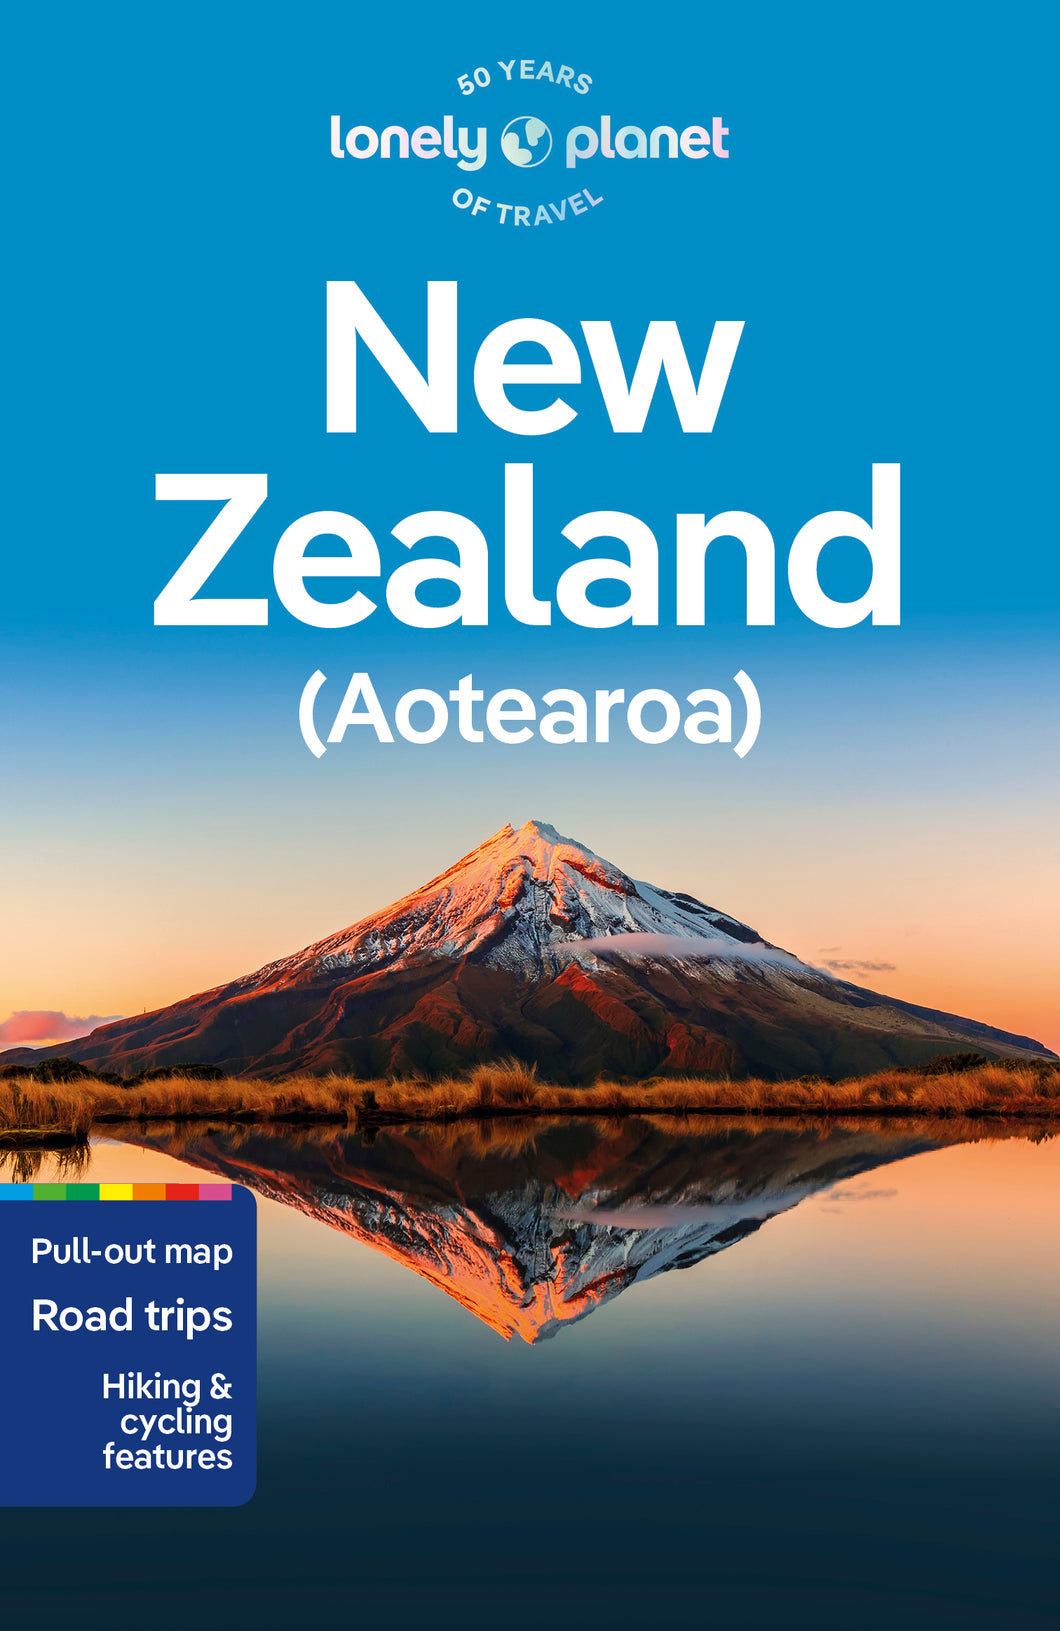 Lonely Planet New Zealand (Aotearoa) 21st Edition